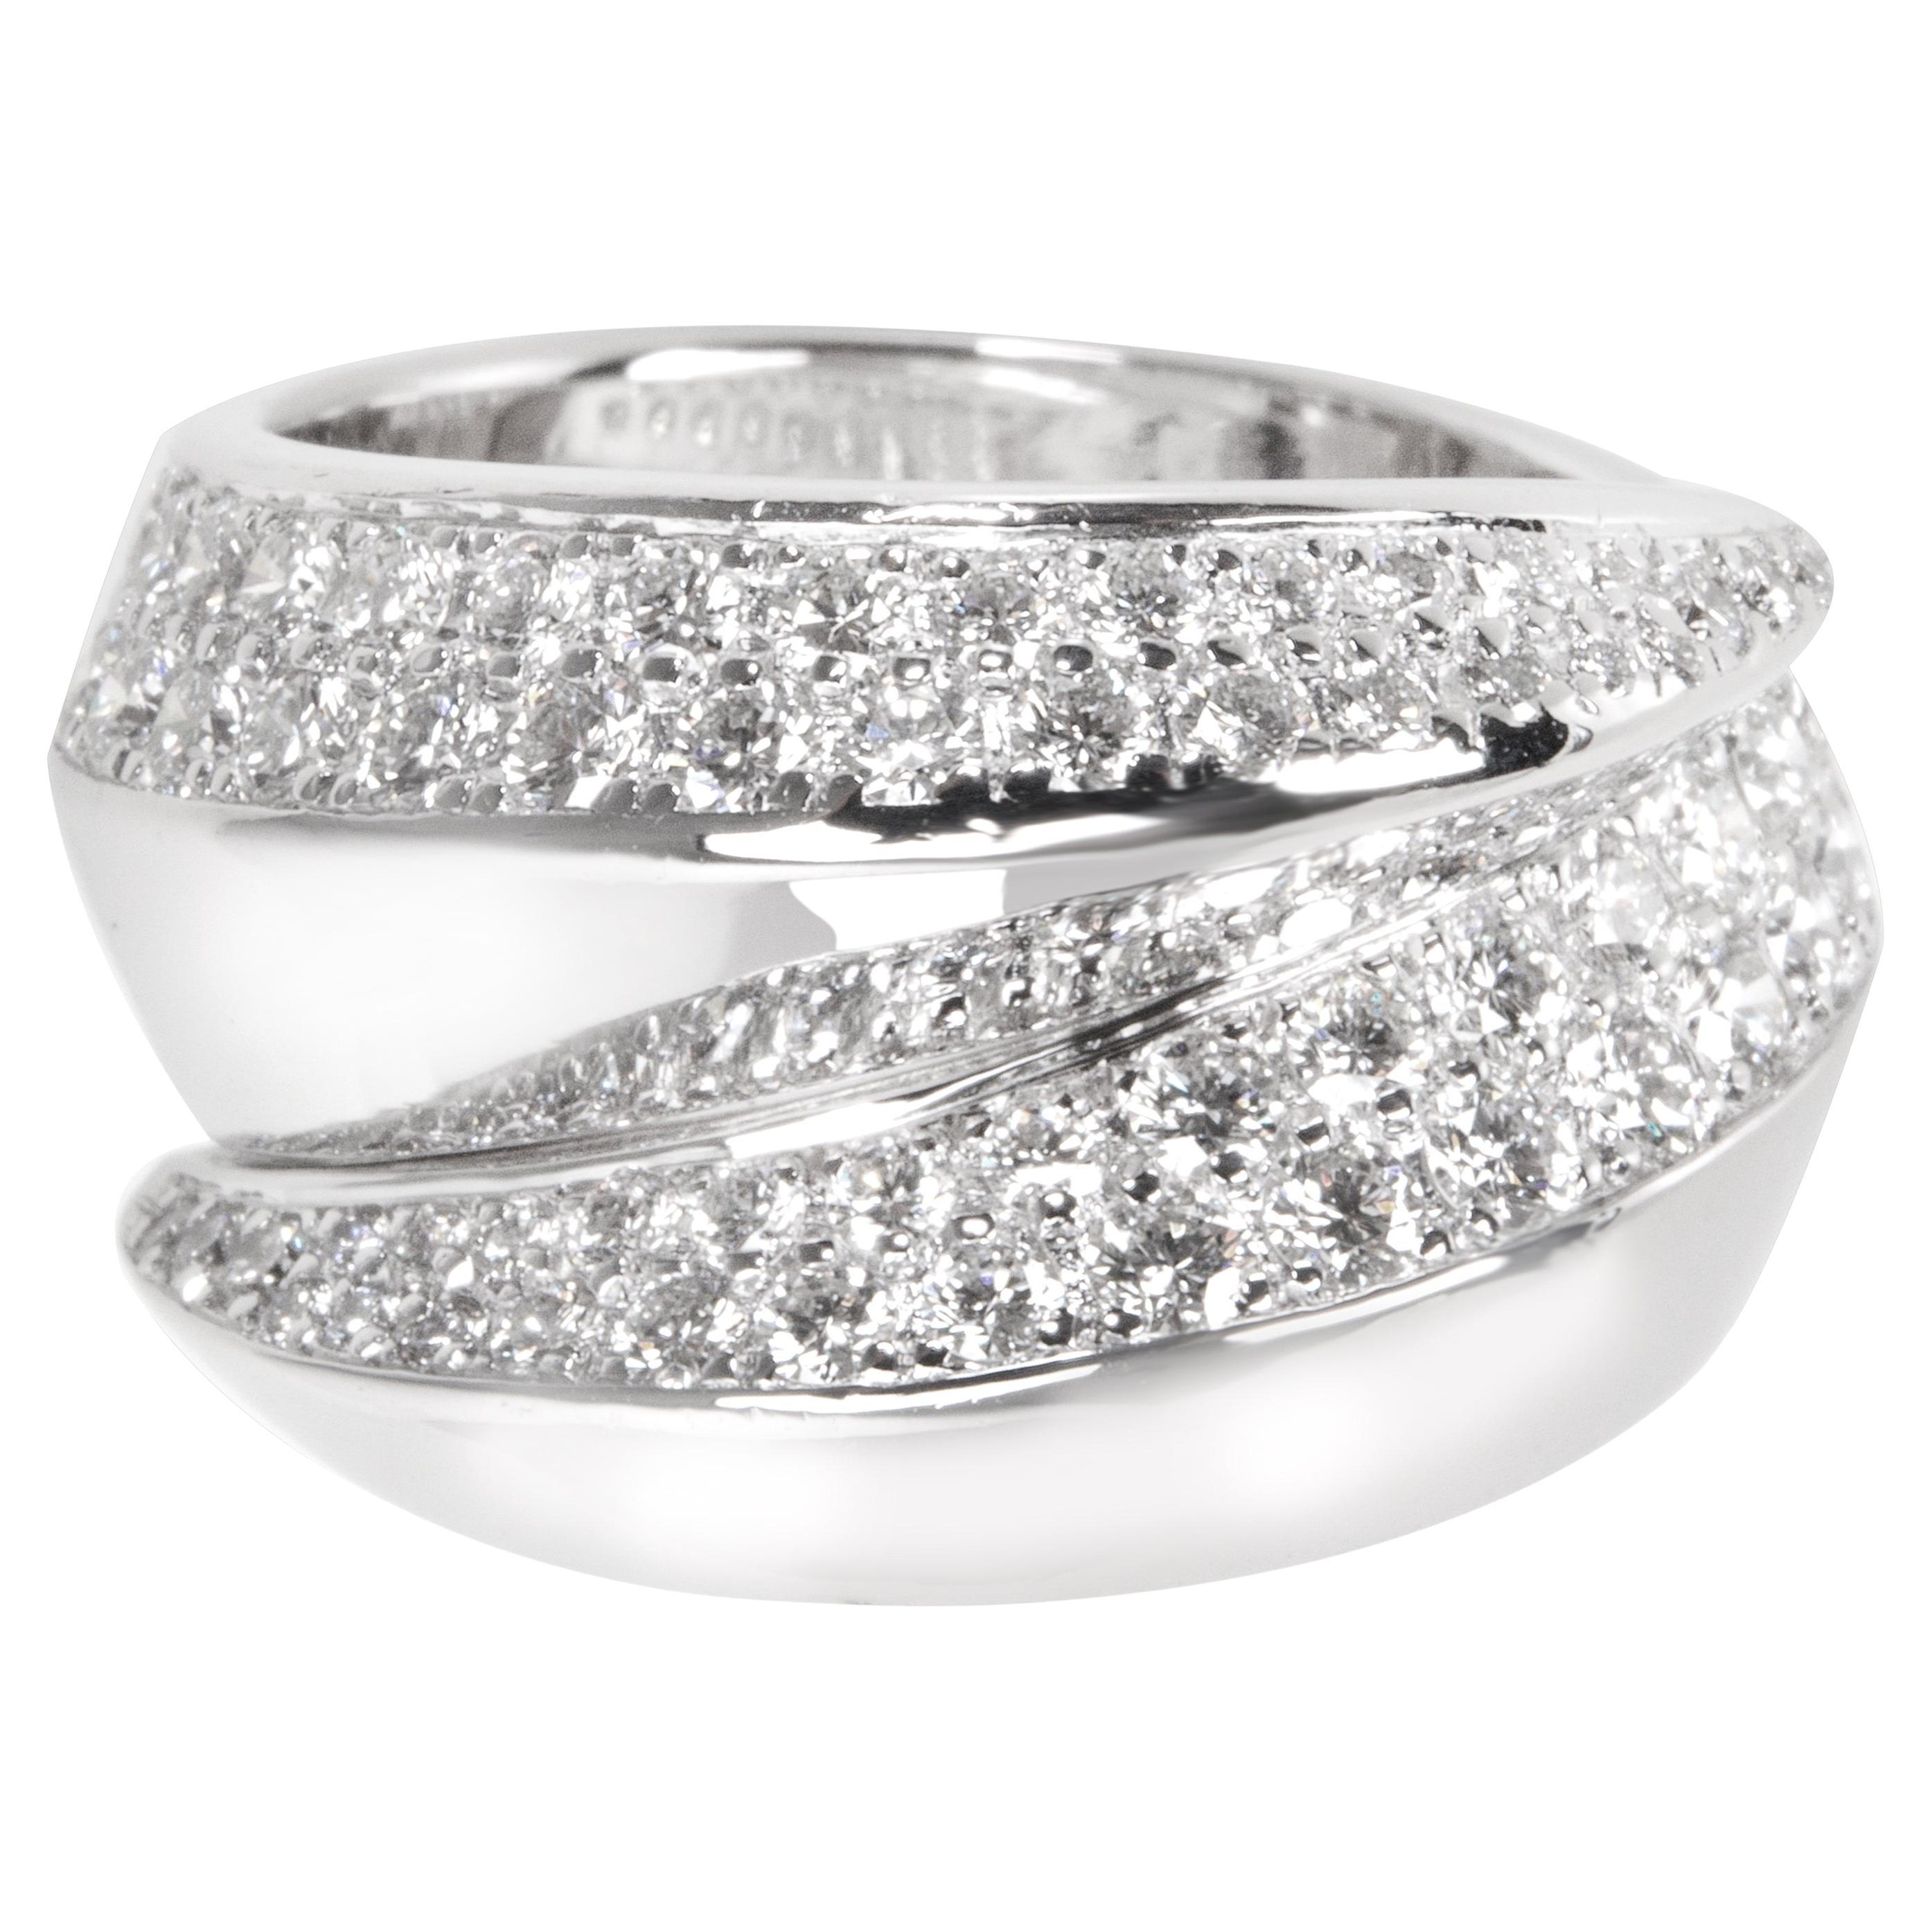 Cartier Panthere Griffe Ring in 18KT White Gold 1.70 Ctw